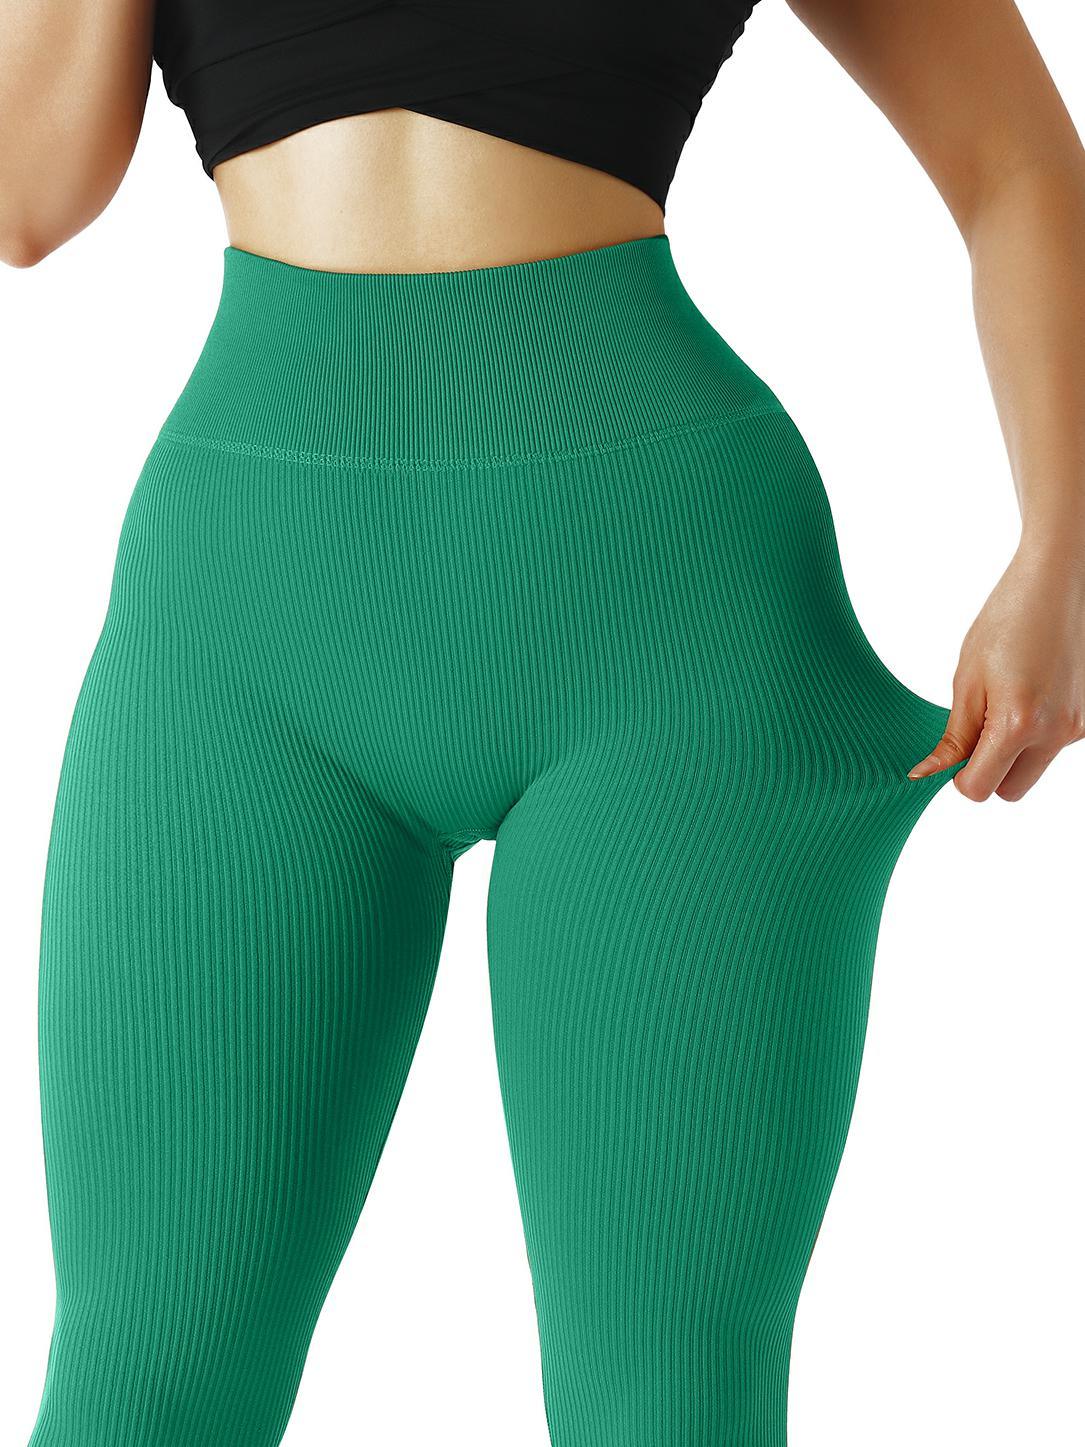 Women's High Waist Thick Seamless Ribbed Stretchy Leggings Bottoms Size 8-14